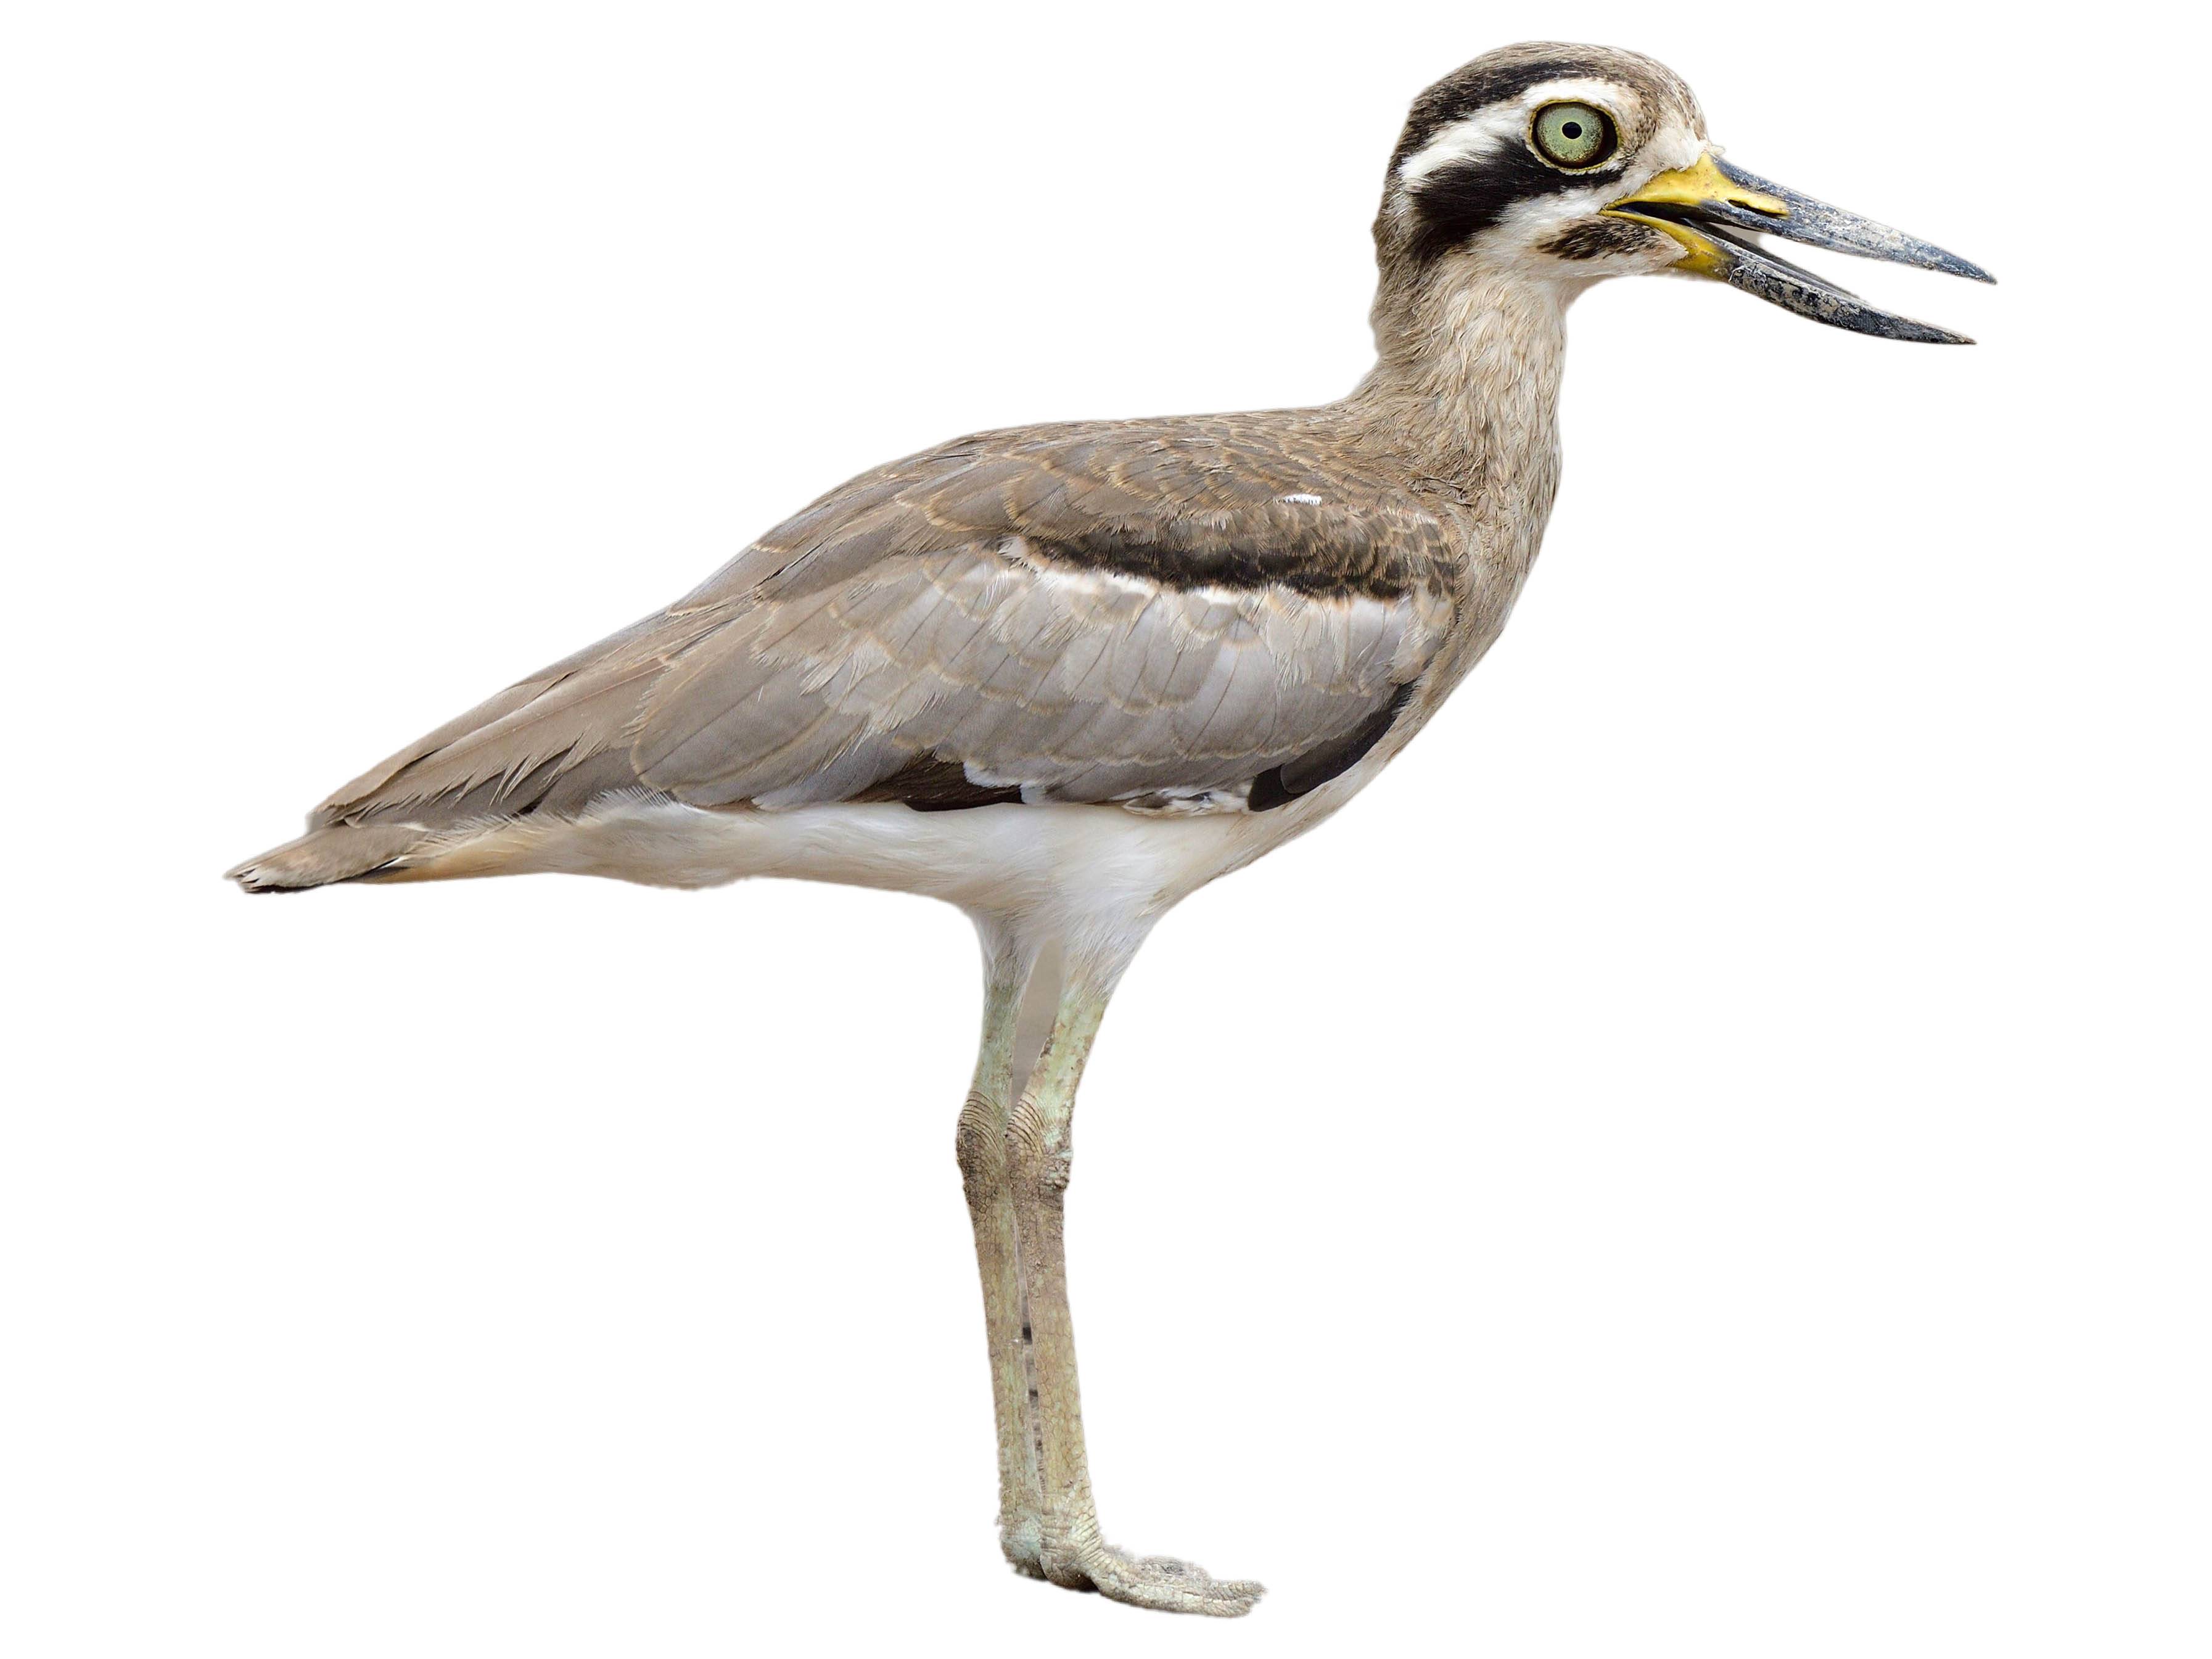 A photo of a Great Stone-curlew (Esacus recurvirostris)